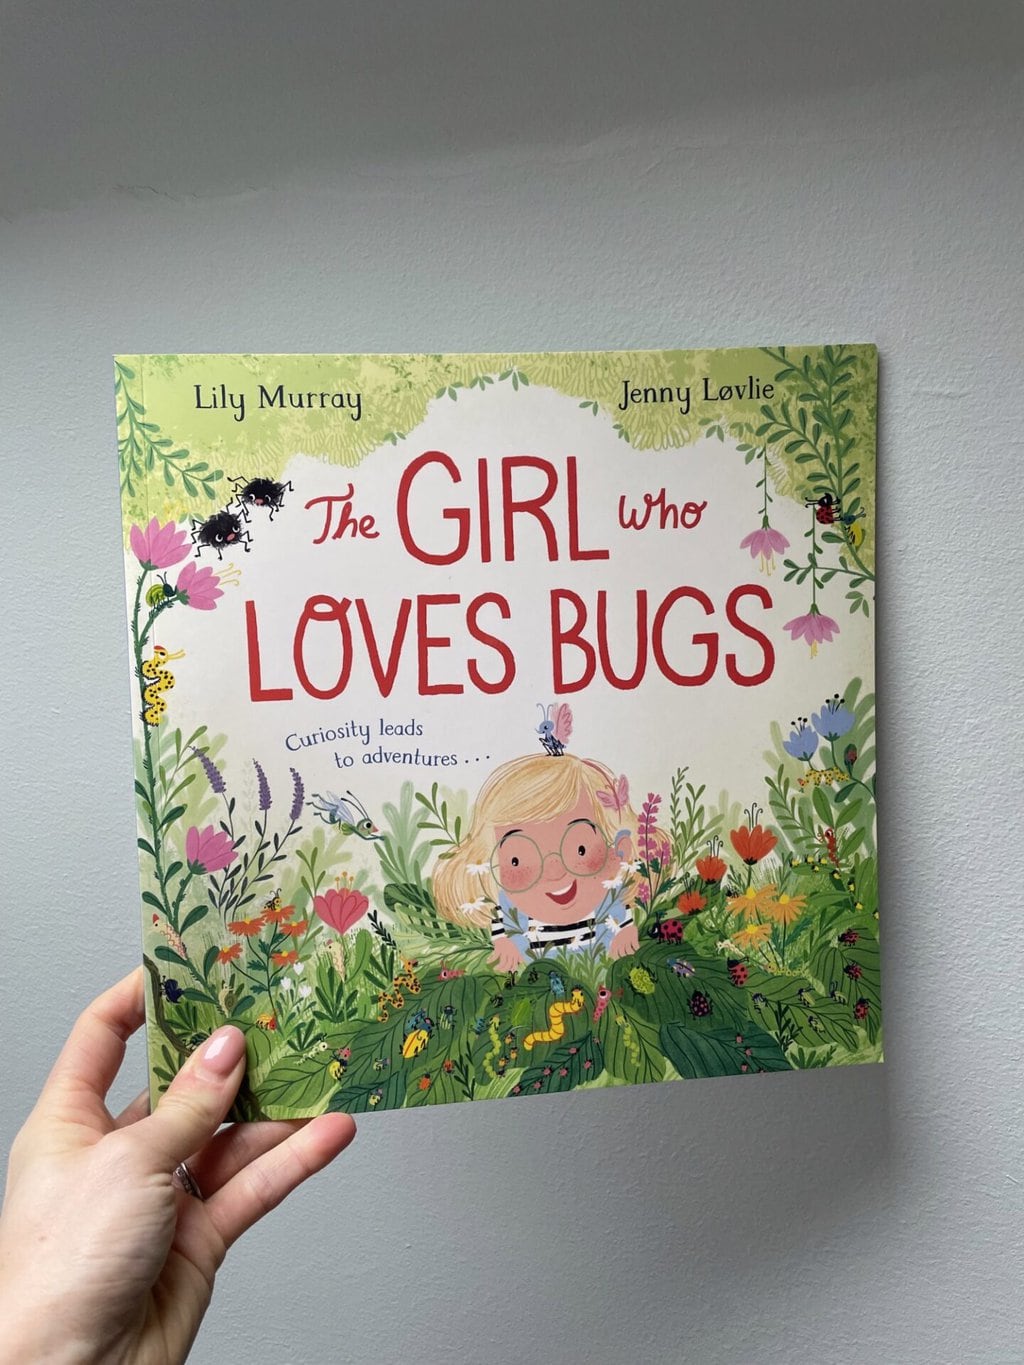 The Girl Who Loves Bugs